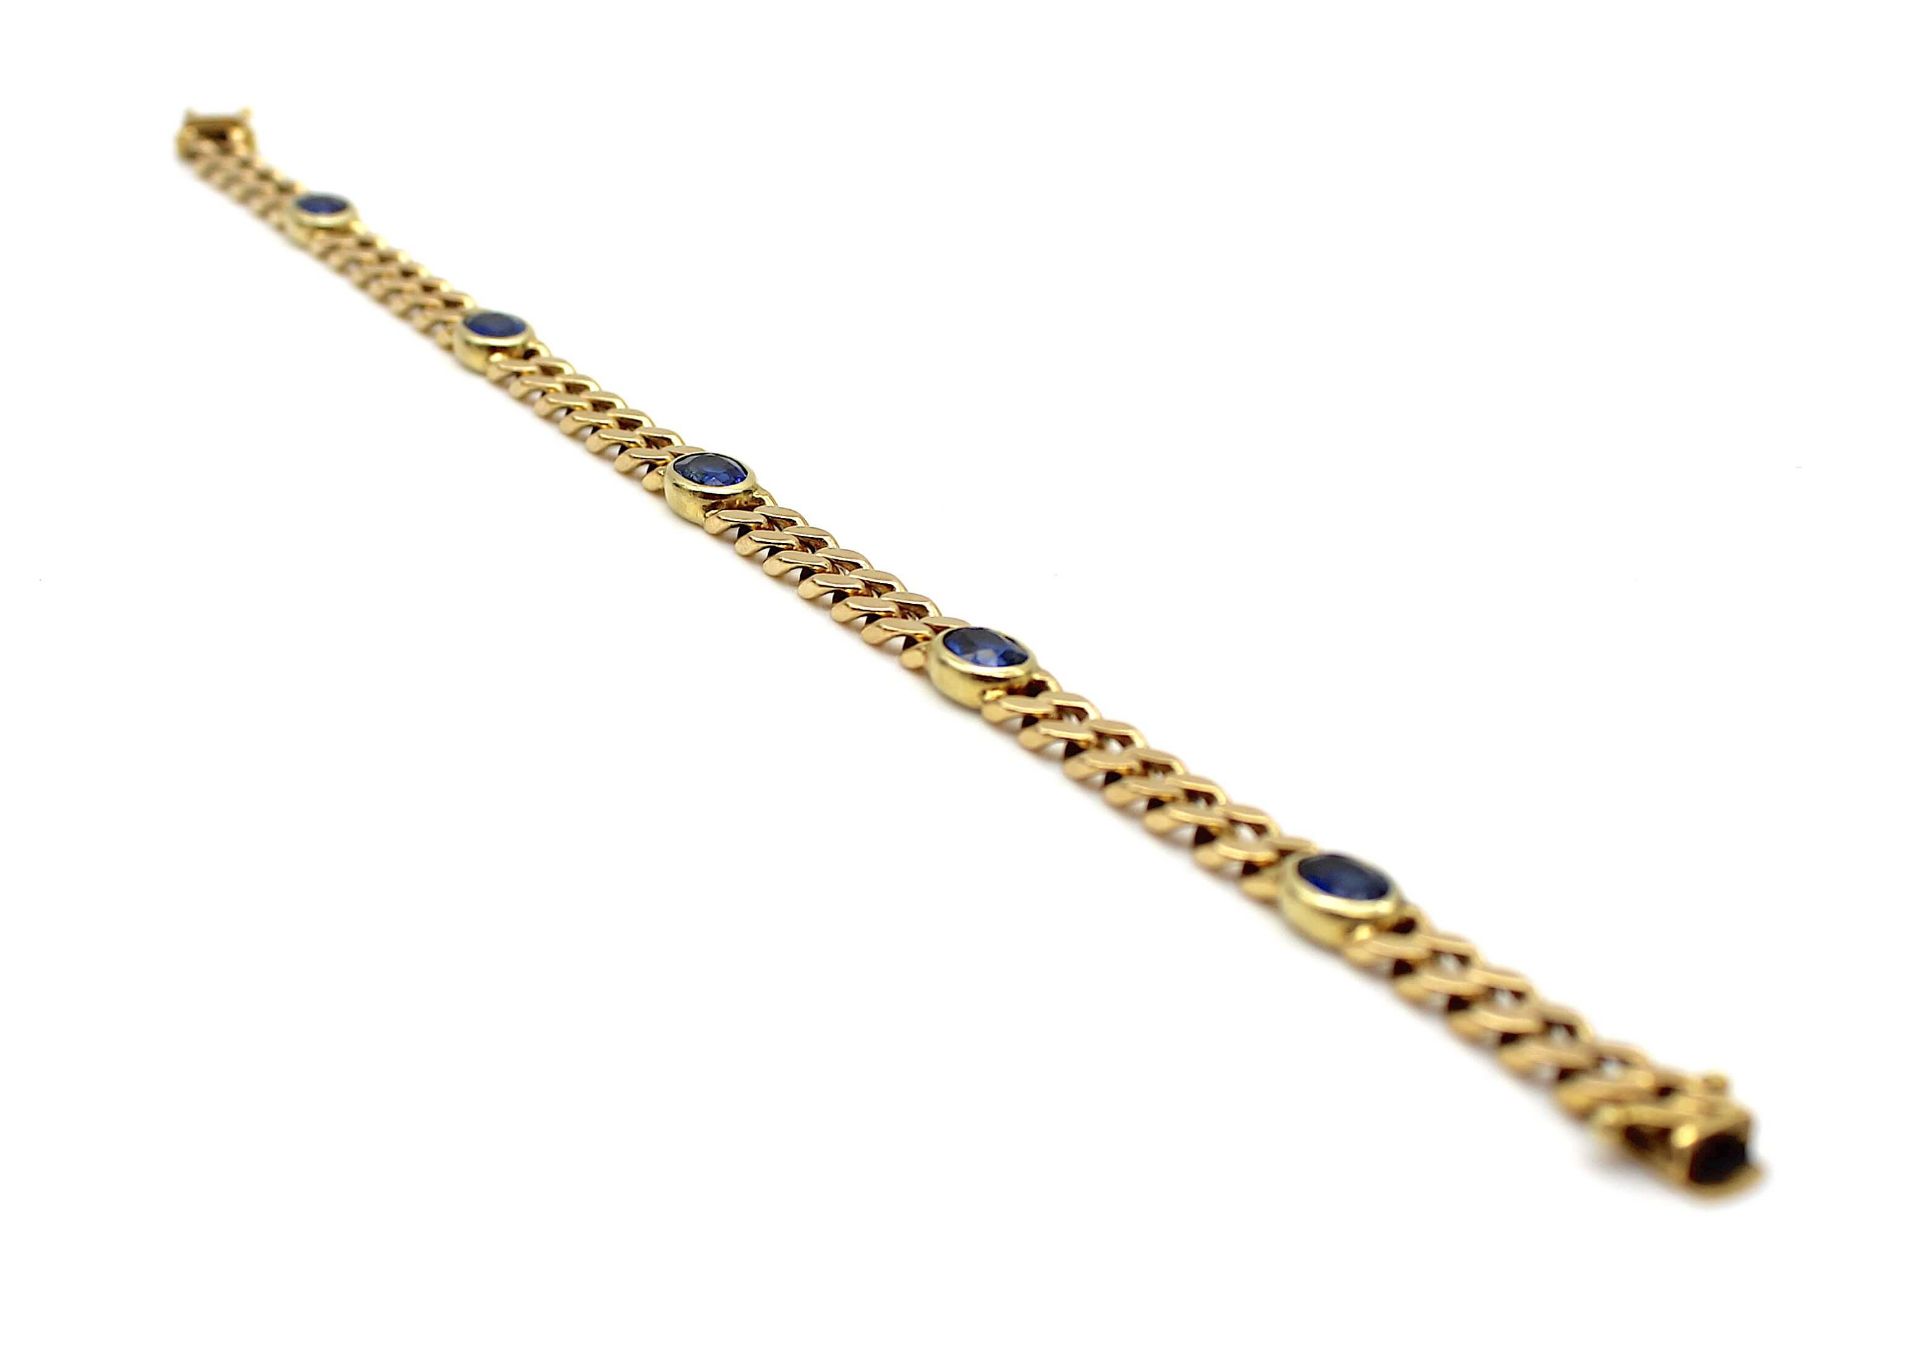 Bracelet with beautiful sapphires 585 gold - Image 3 of 4